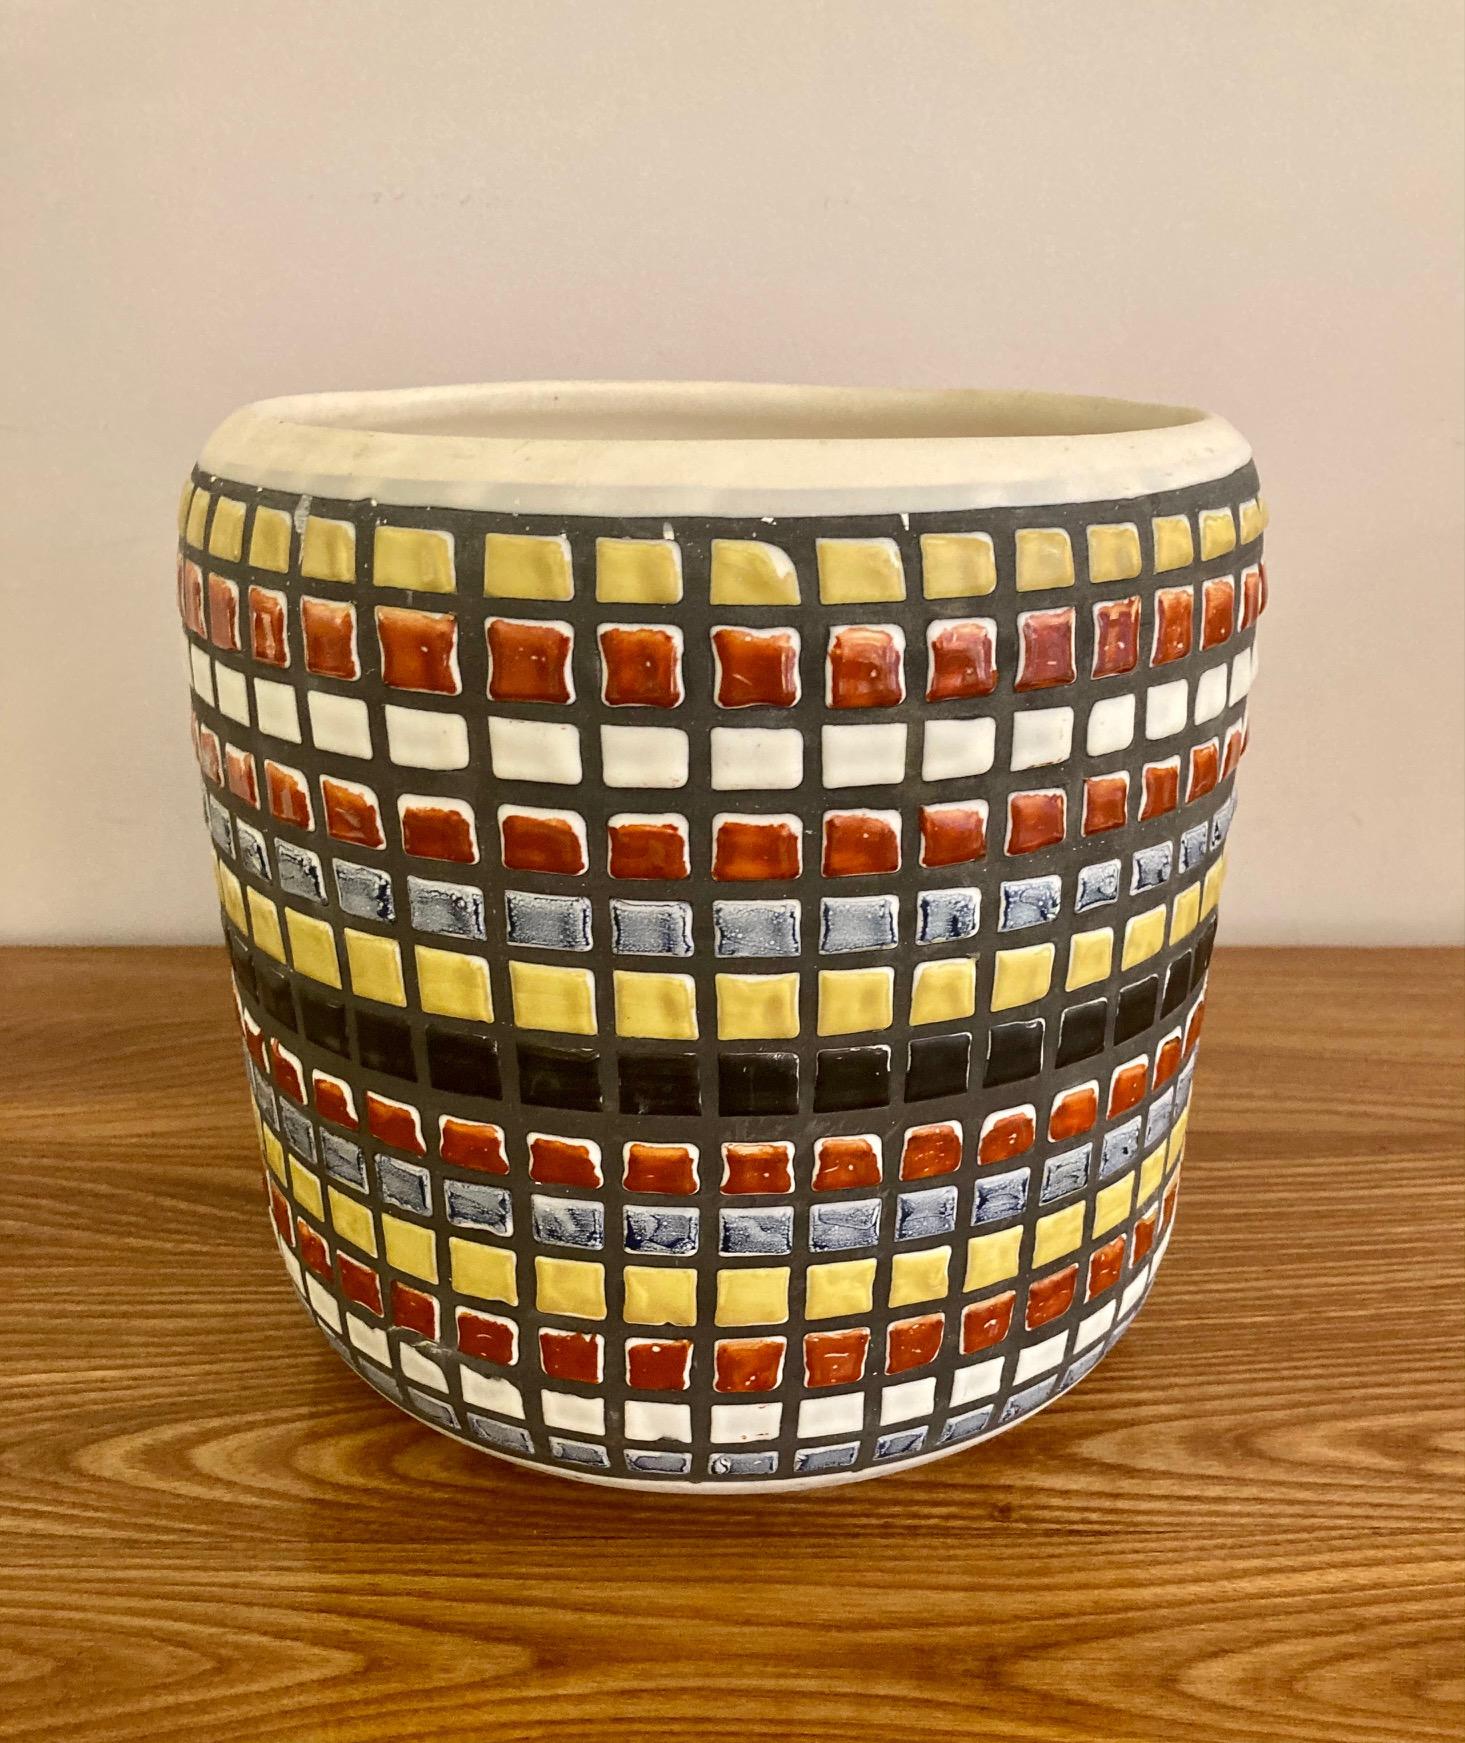 A large cylindrical vase, cachepot or wine cooler,
Glazed ceramic with blue, red, yellow, blackened and white geometrical pattern.
This decor is referred to as 